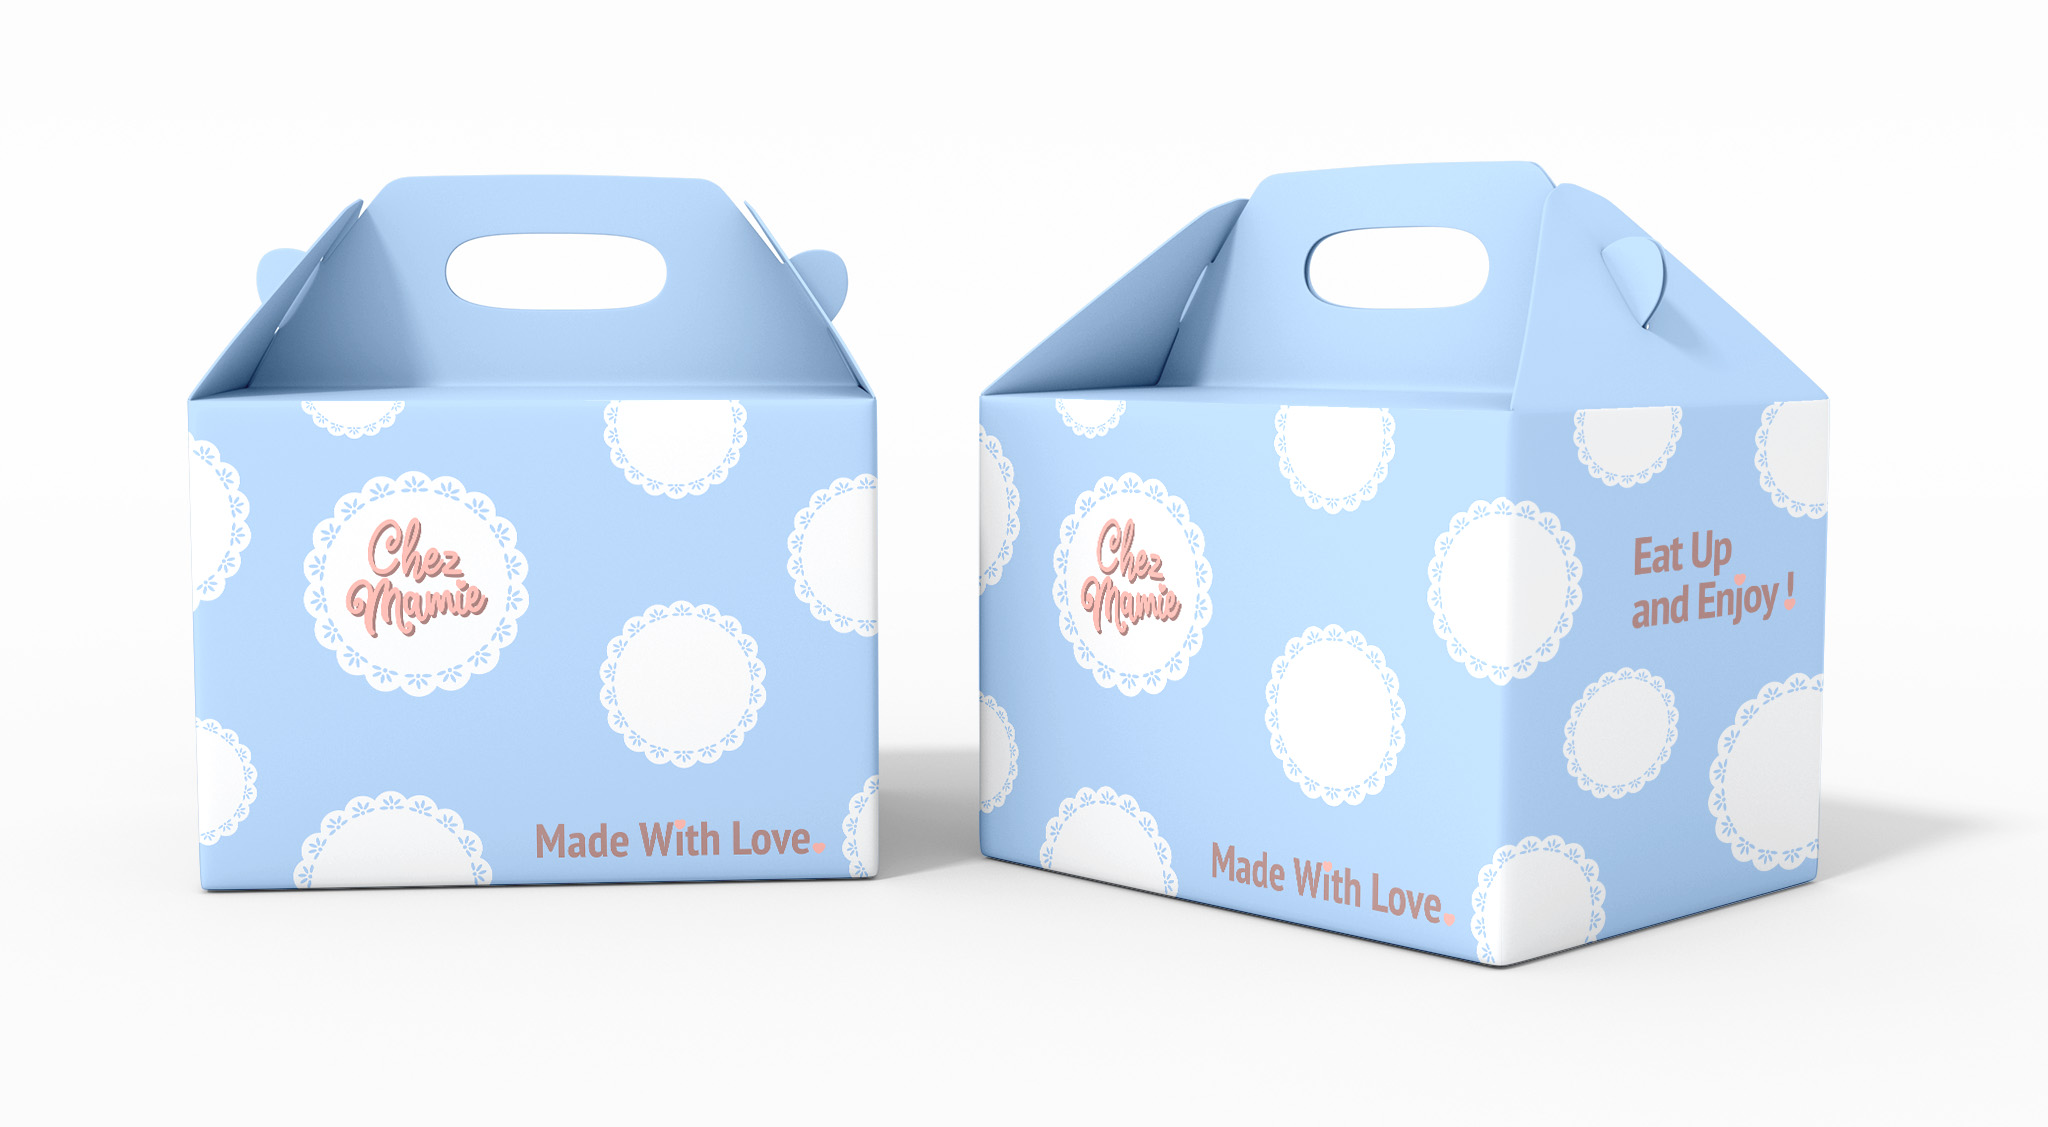 Mockup of packaging design for to go box or fictional company Chez Mamie. The design features a blue background with a white doily pattern and one of the doilies is the company logo. The box also features the text "Made with love" and "Eat up and enjoy" .